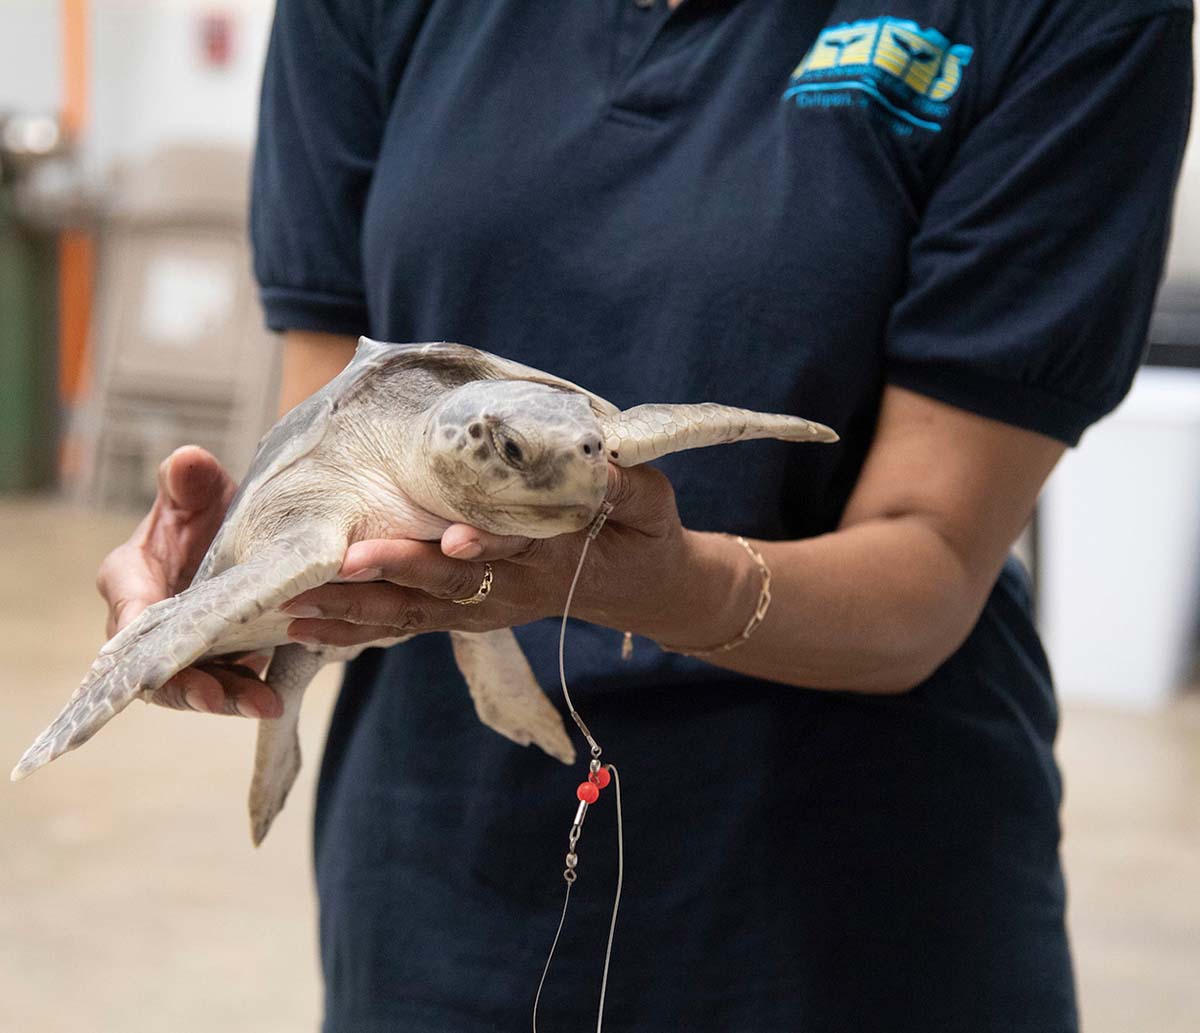 Someone holds an injured Kemp's Ridley seat turtle